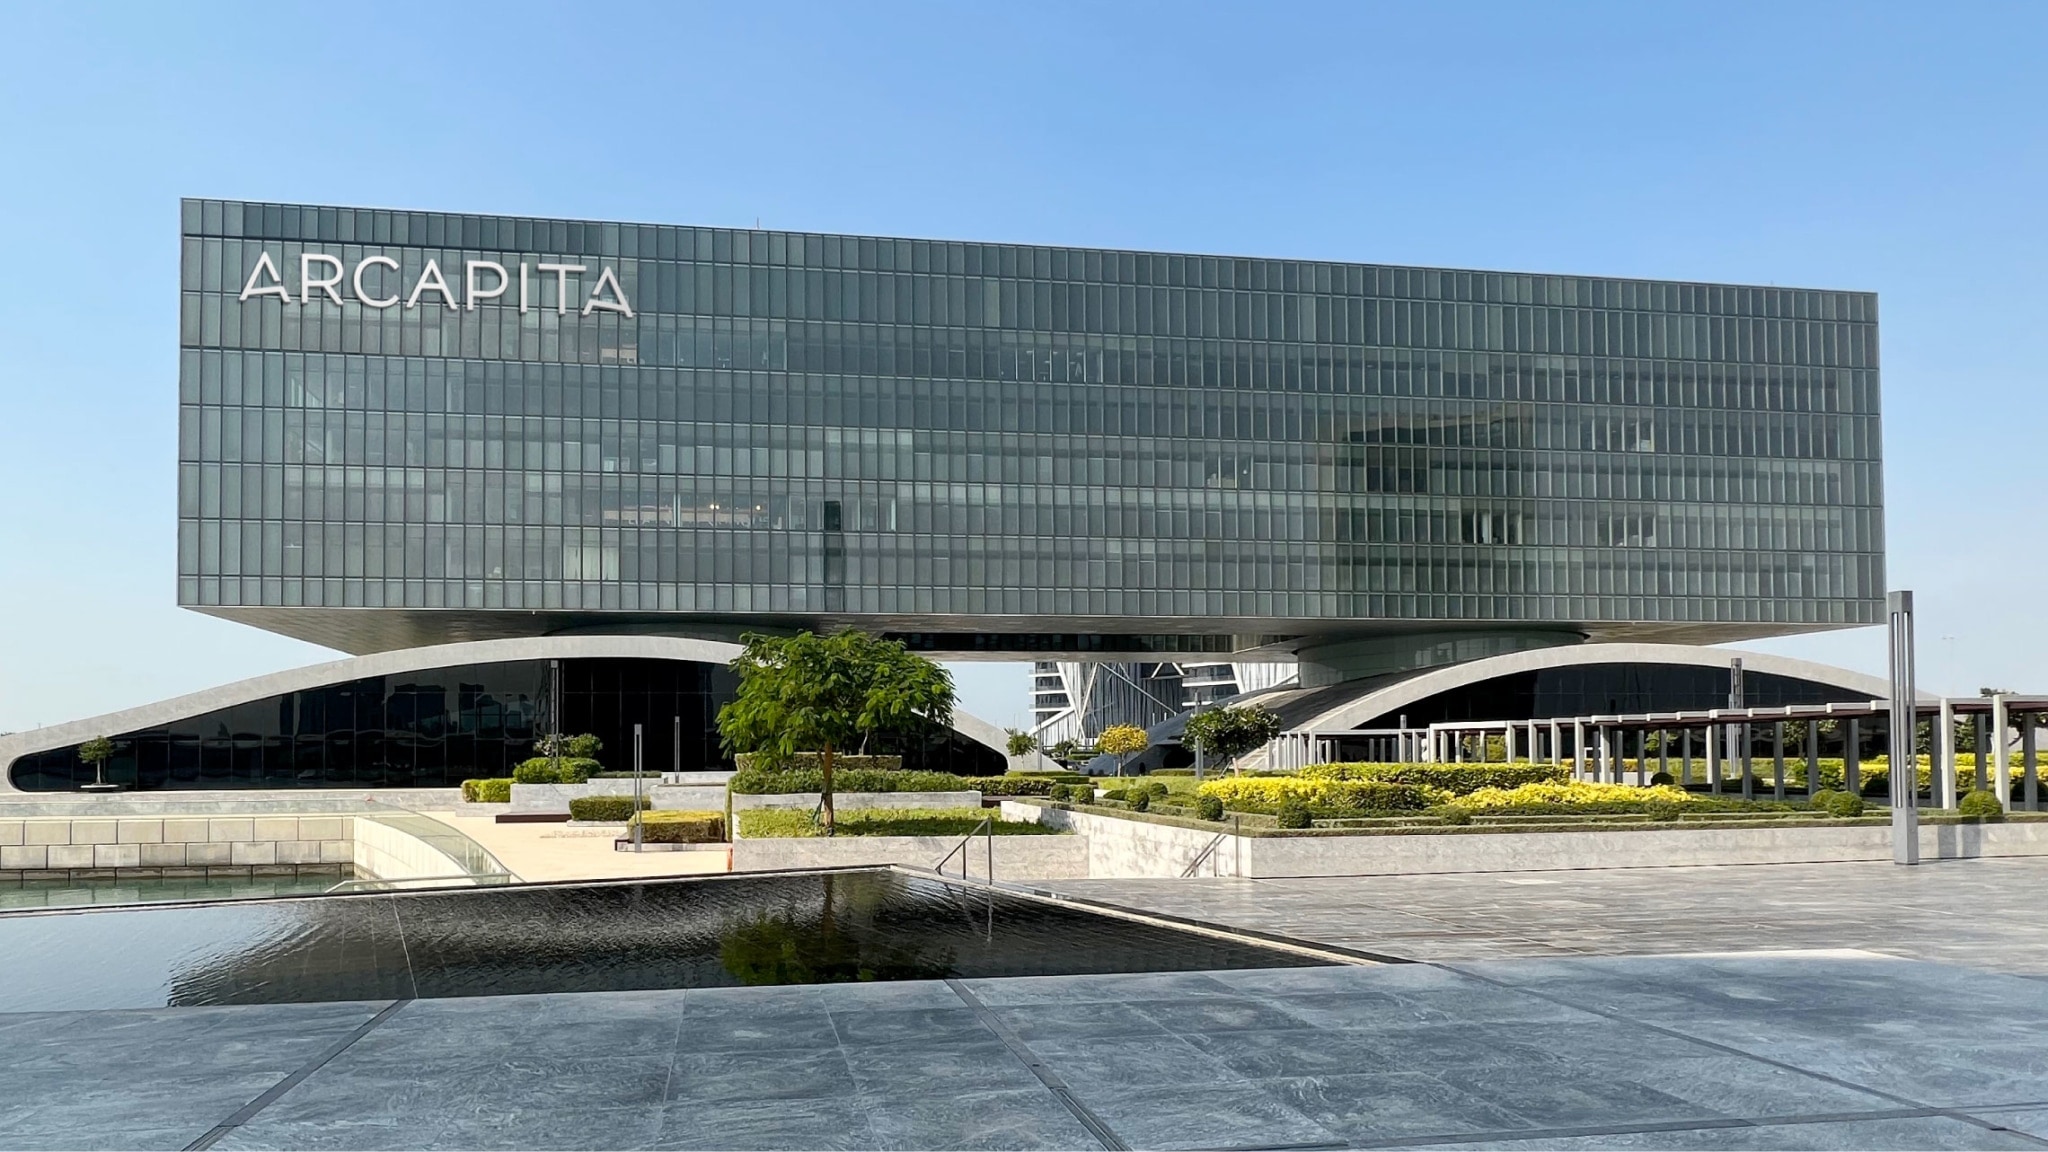 Arcapita's headquarters in Manama, Bahrain, showing the main building with the logo applied to the façade